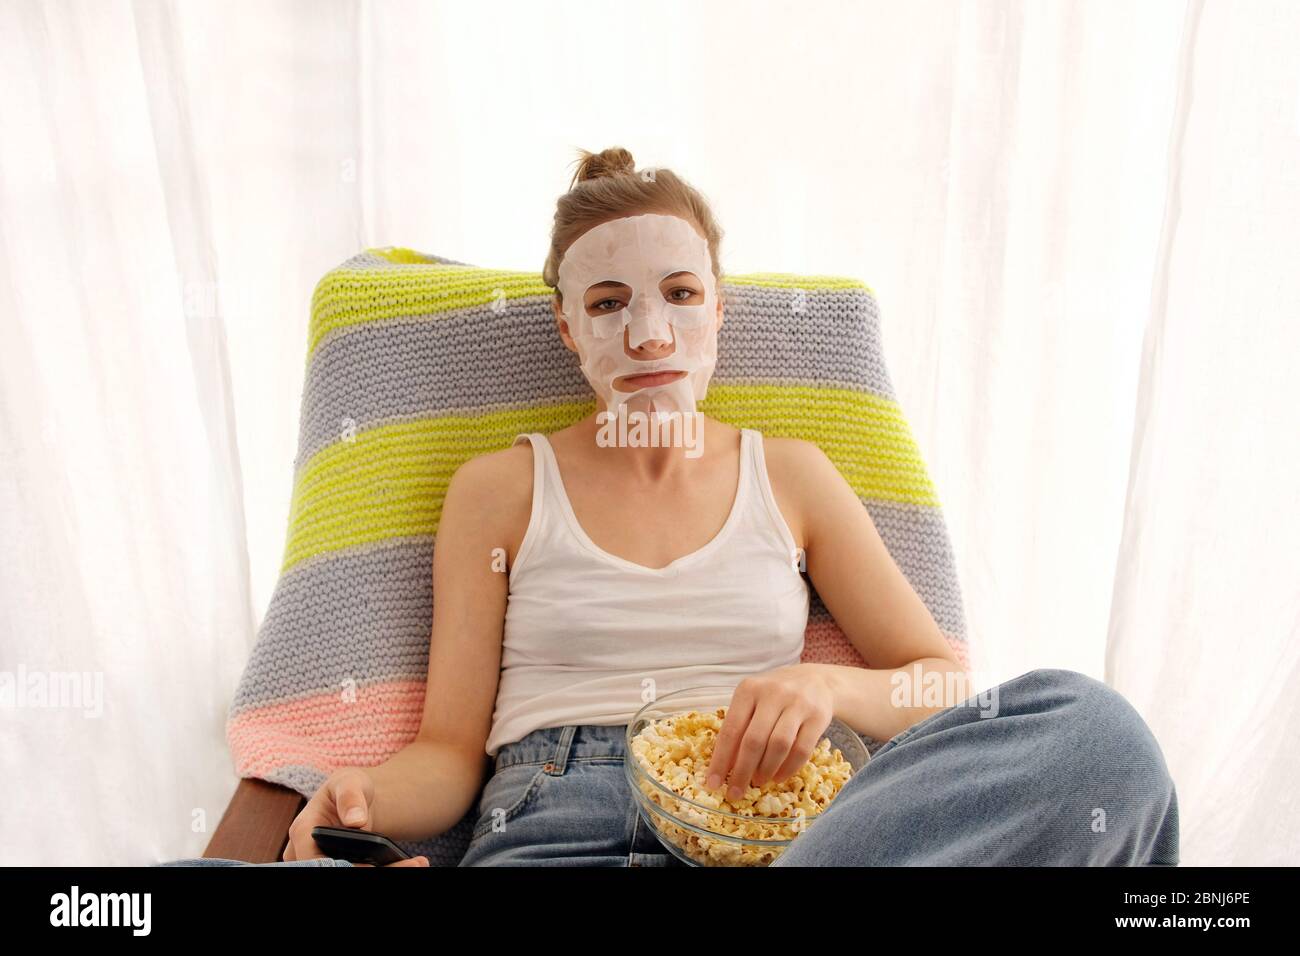 Woman with a remote and popcorn Stock Photo